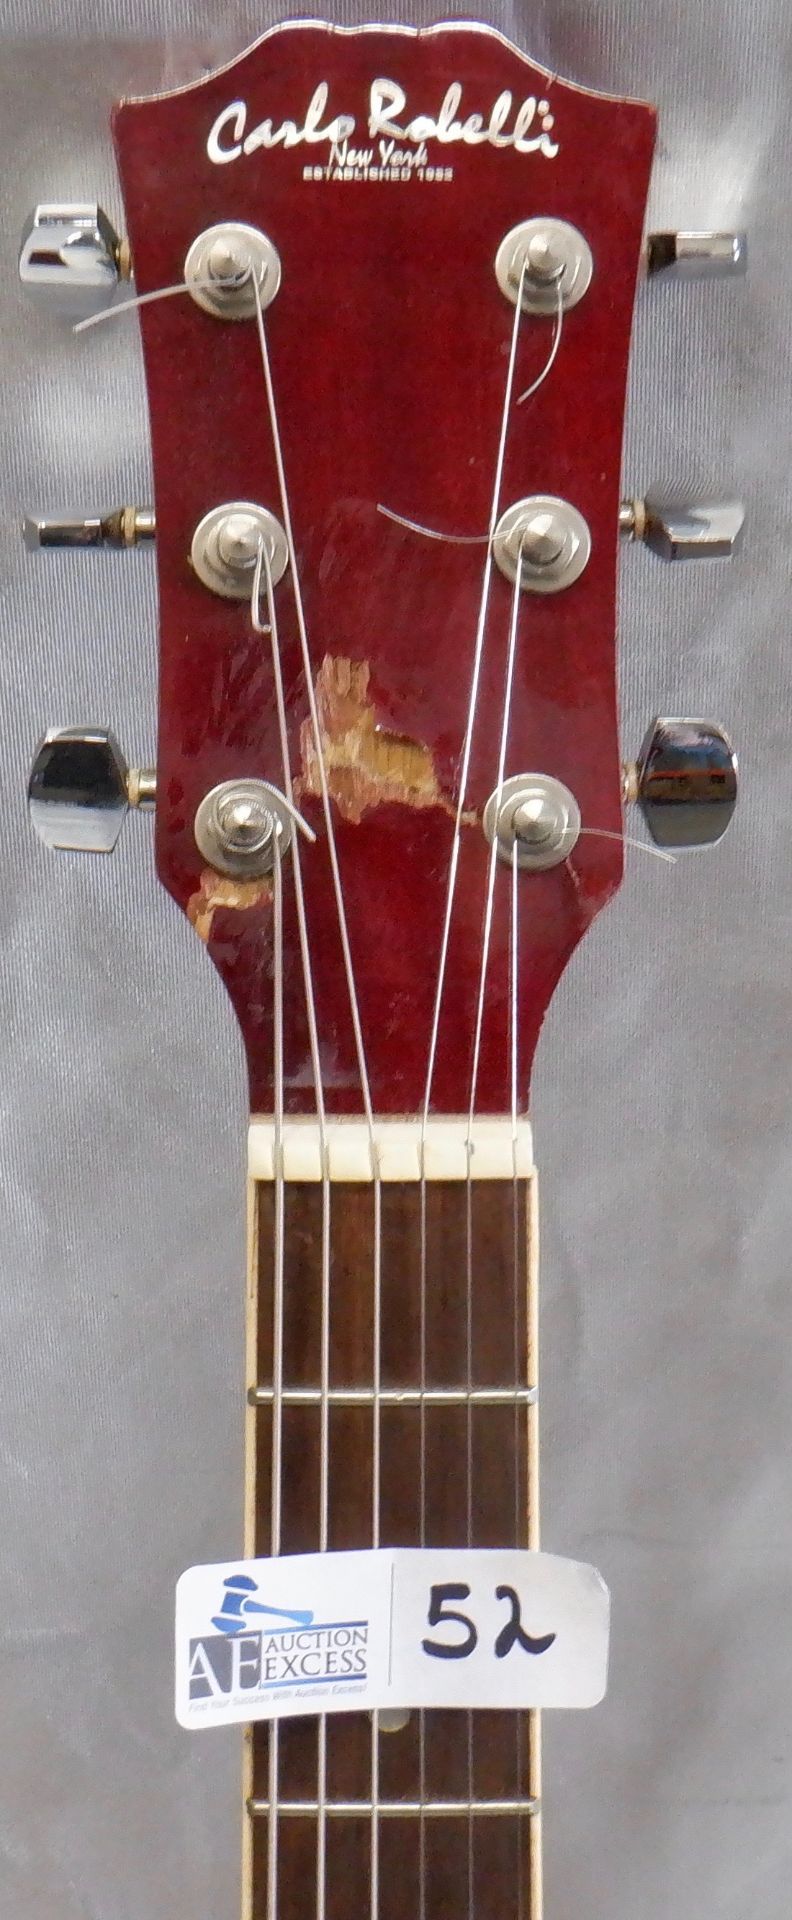 CARLO ROBELLI ACOUSTIC GUITAR WITH CASE - Image 3 of 7